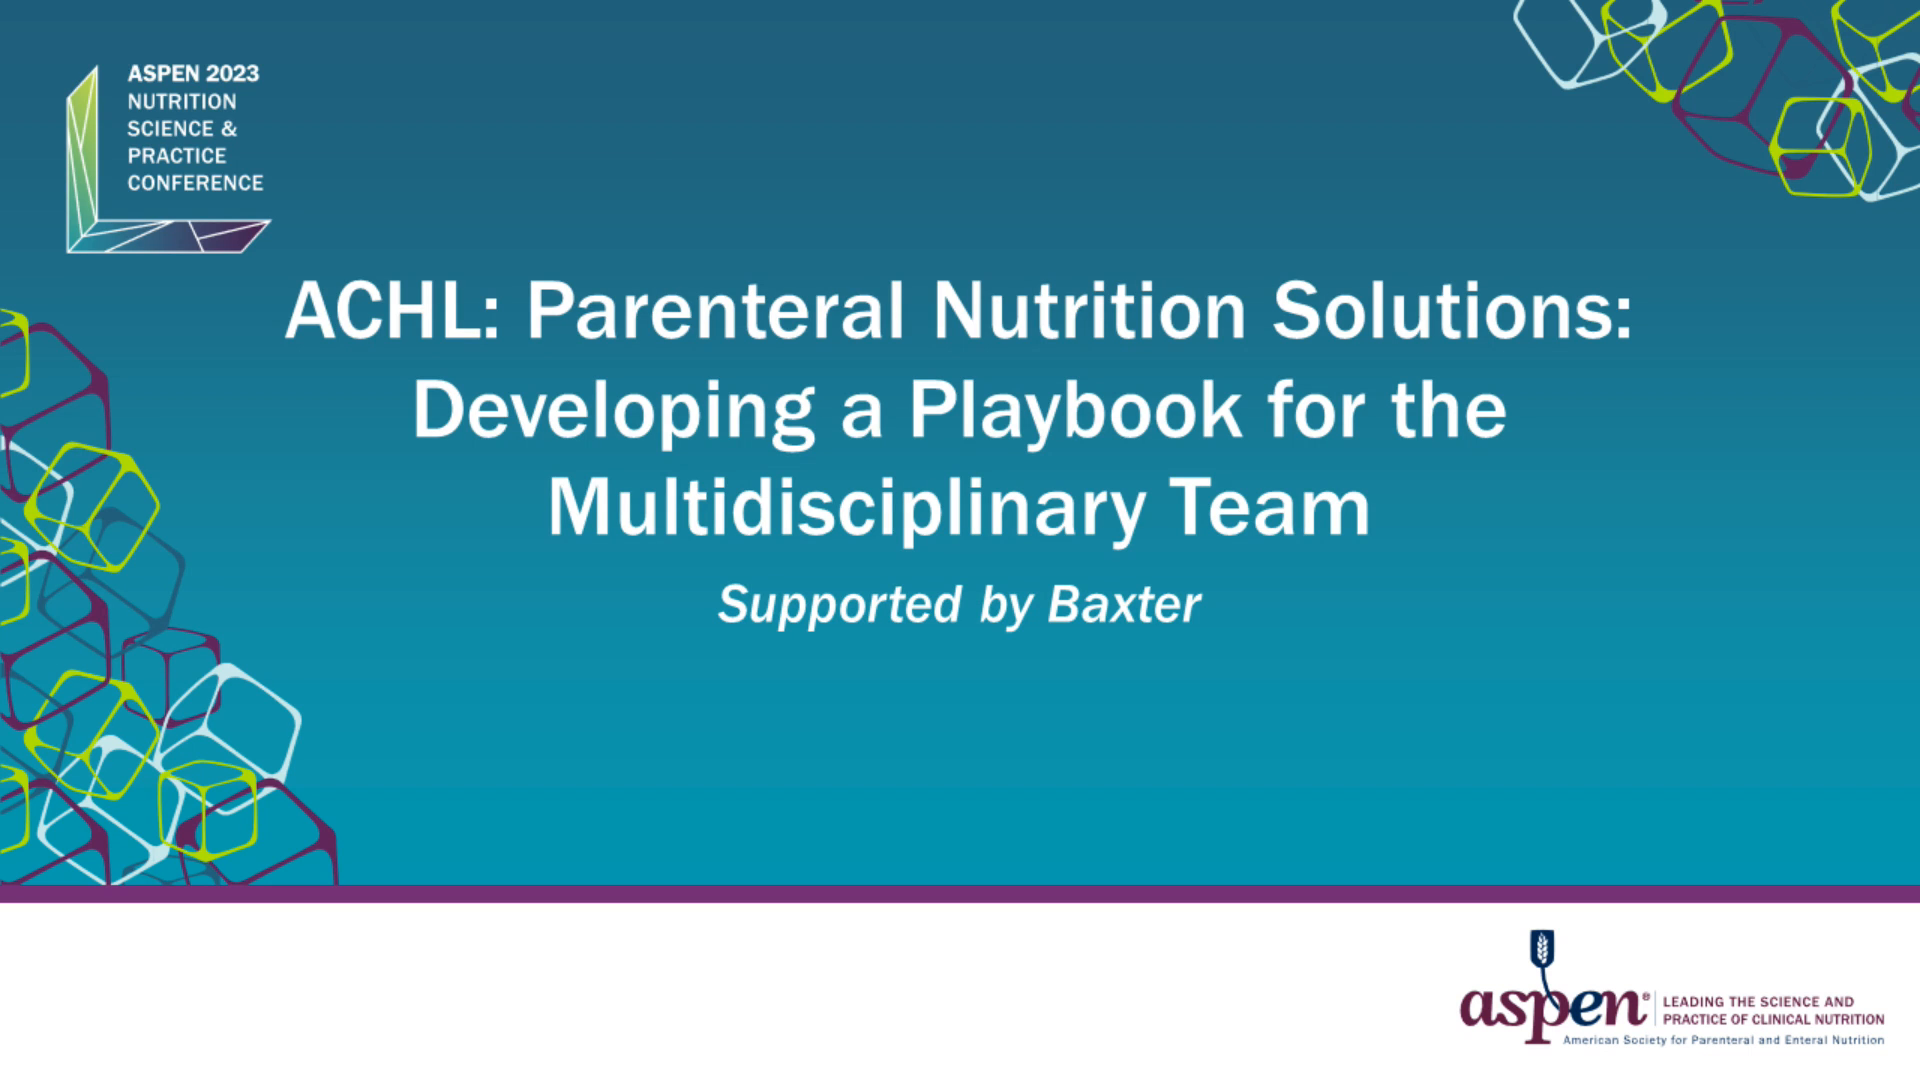 ACHL: Parenteral Nutrition Solutions: Developing a Playbook for the Multidisciplinary Team icon